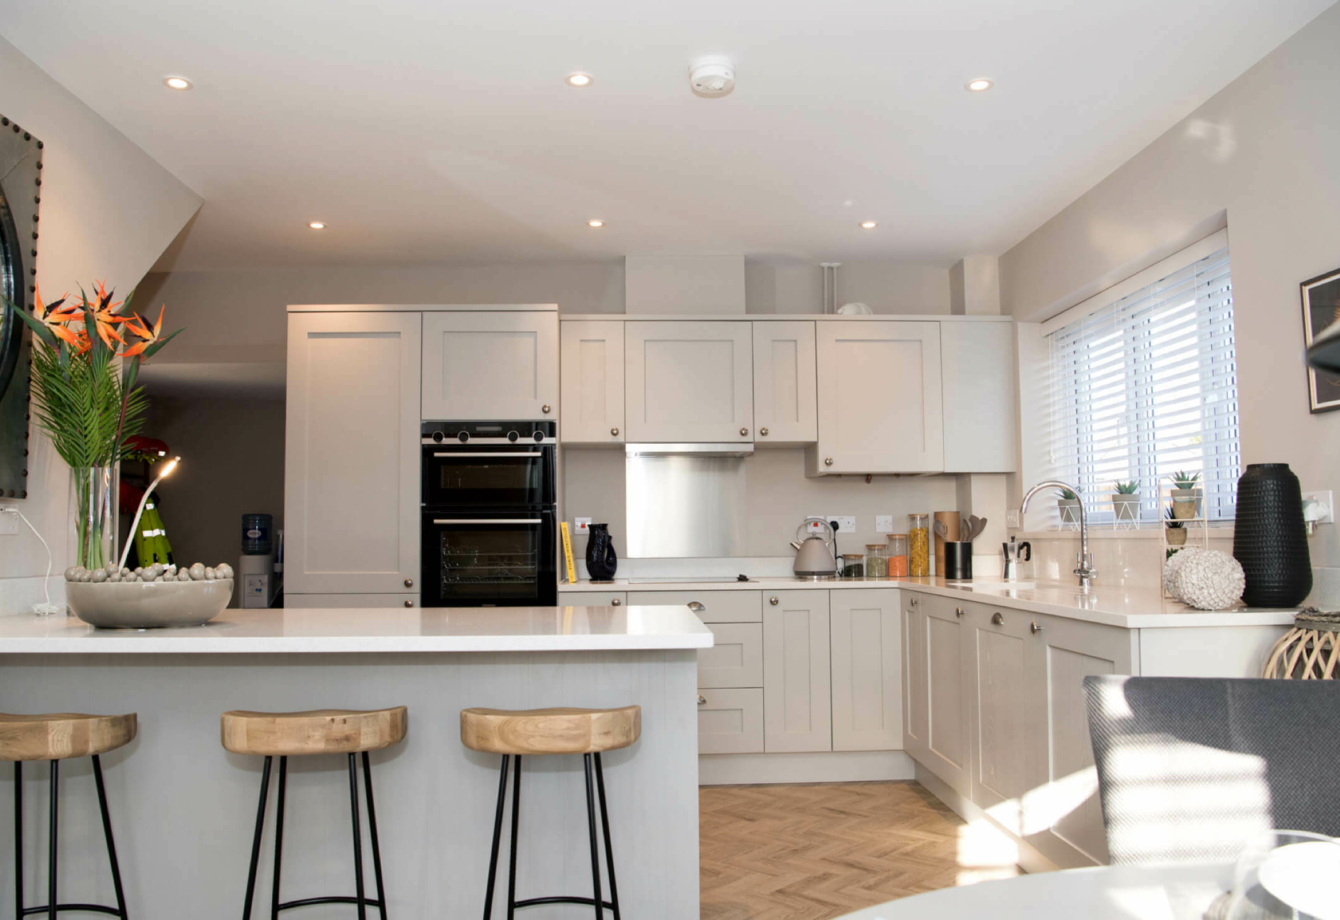 Luxury new build developments Essex using quality craftsmanship and materials